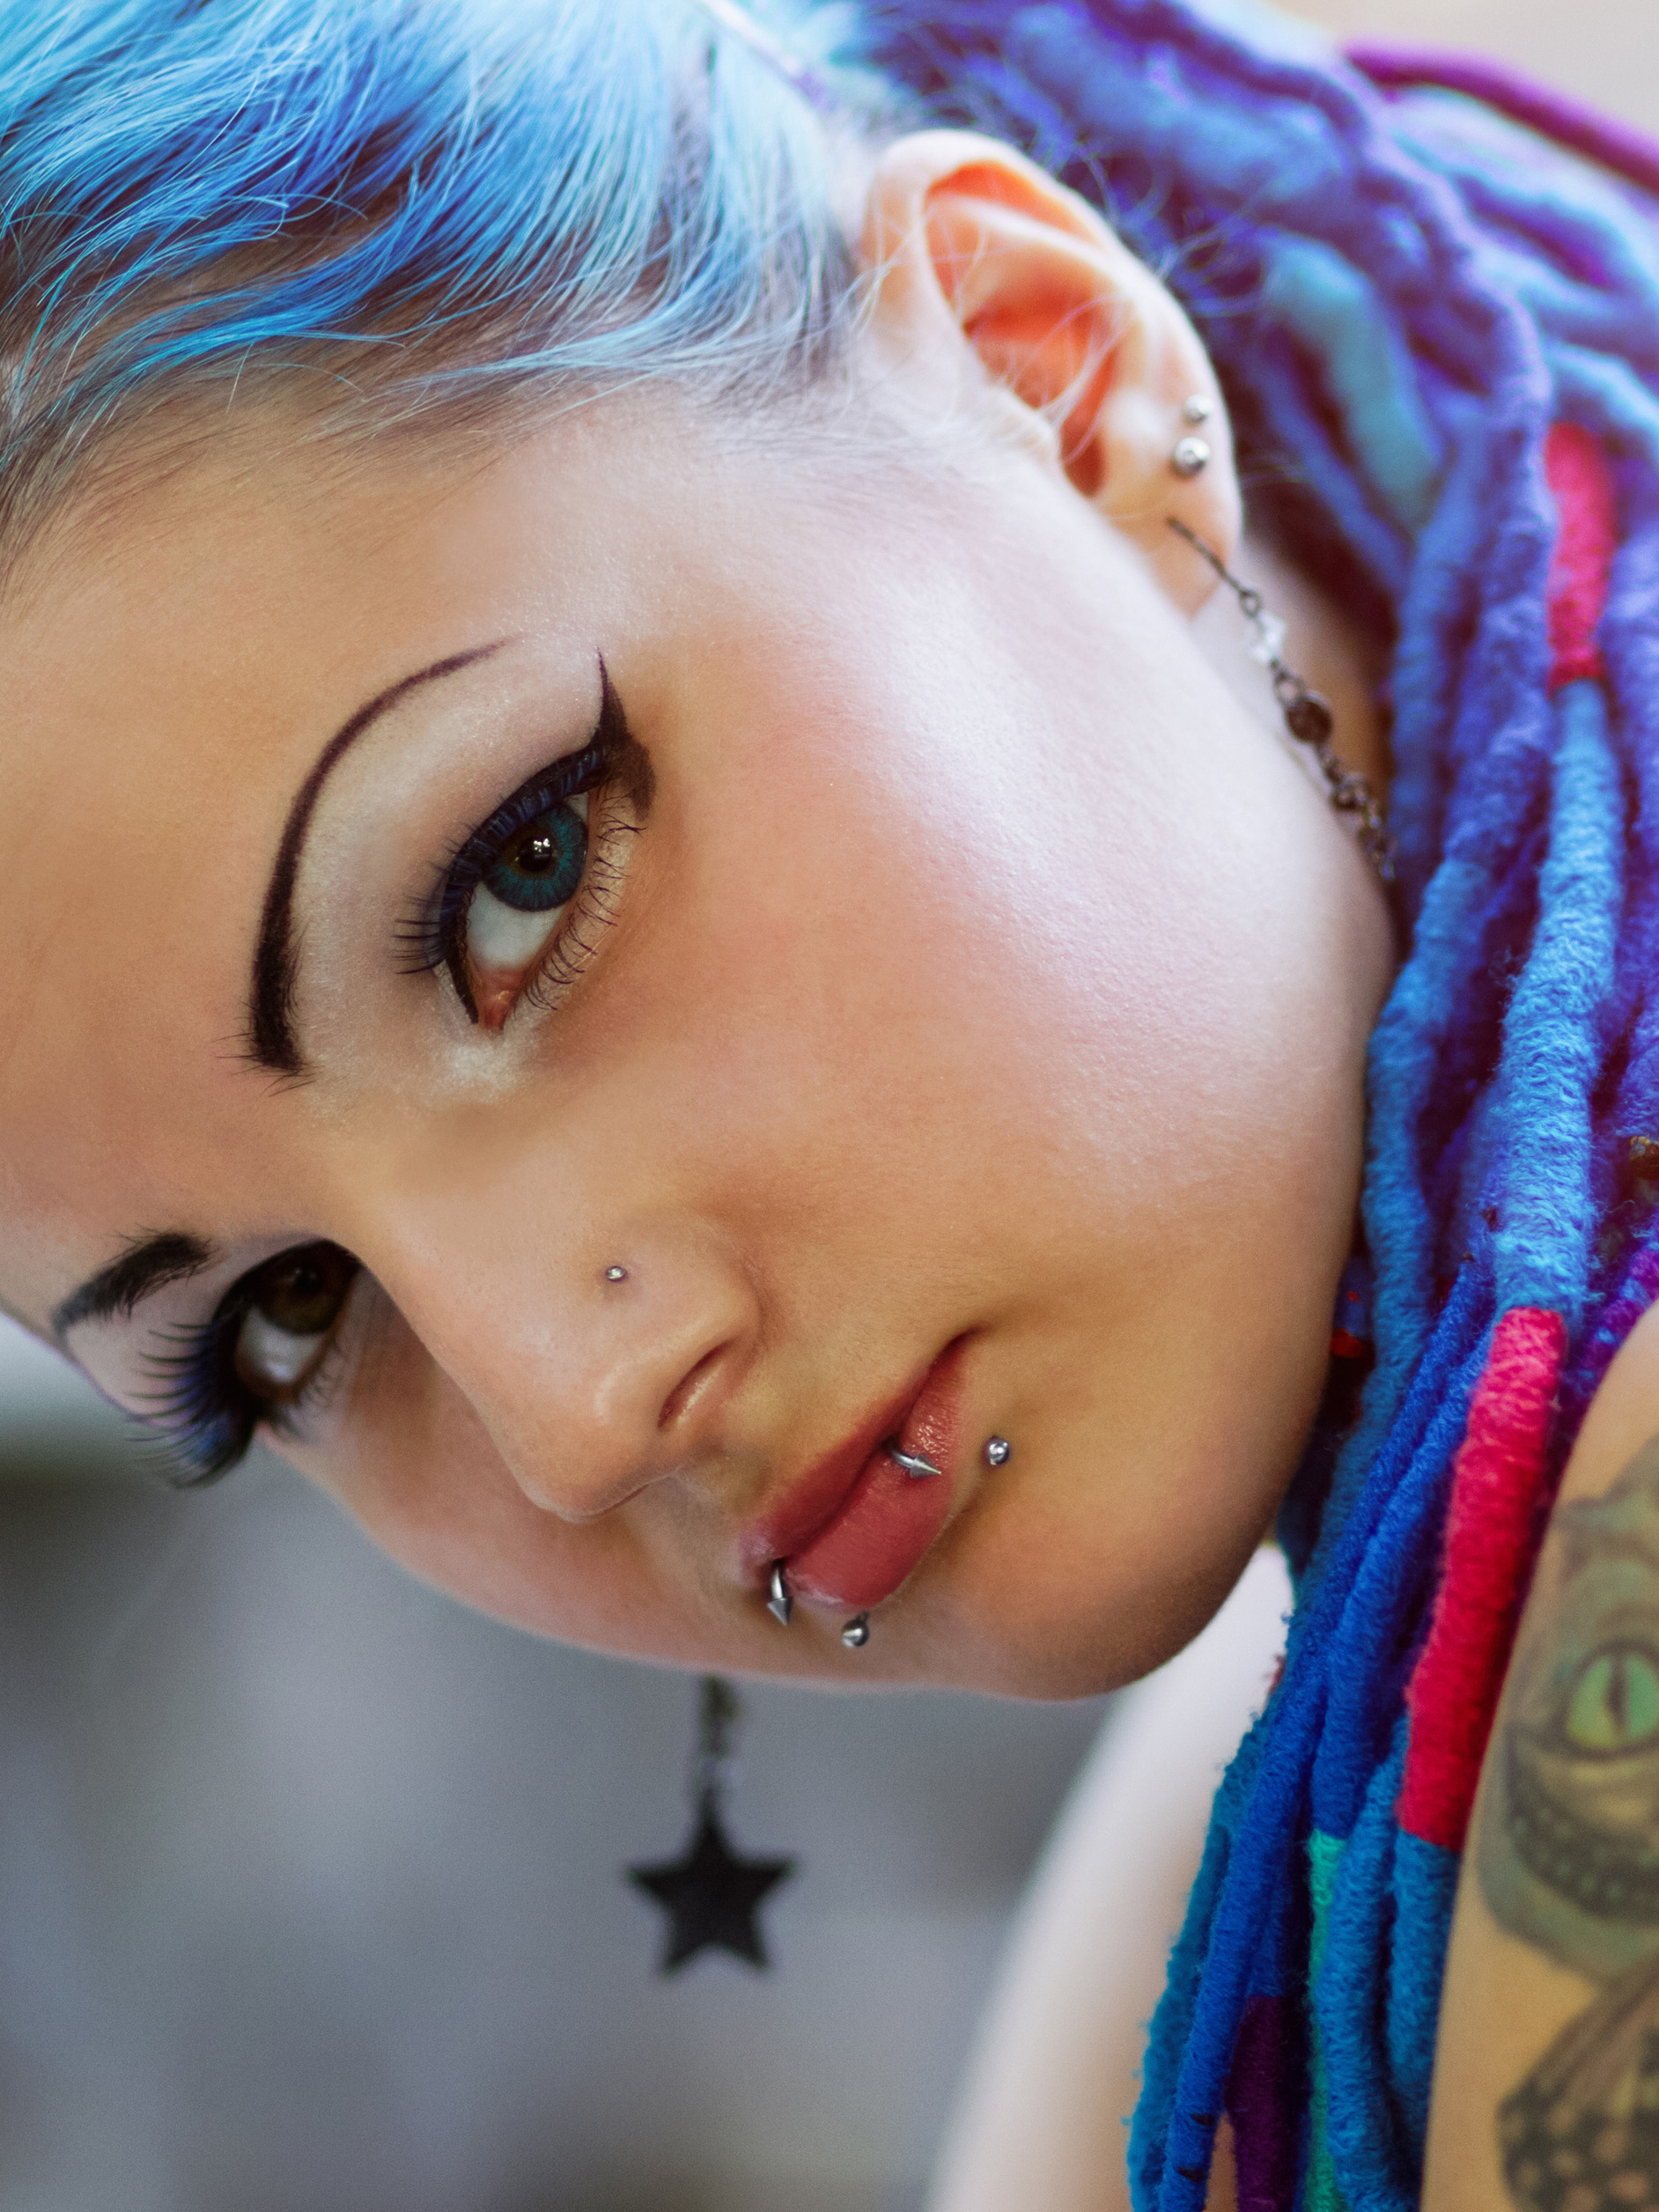 teen girl with blue dreads, lip piercings and tattoo